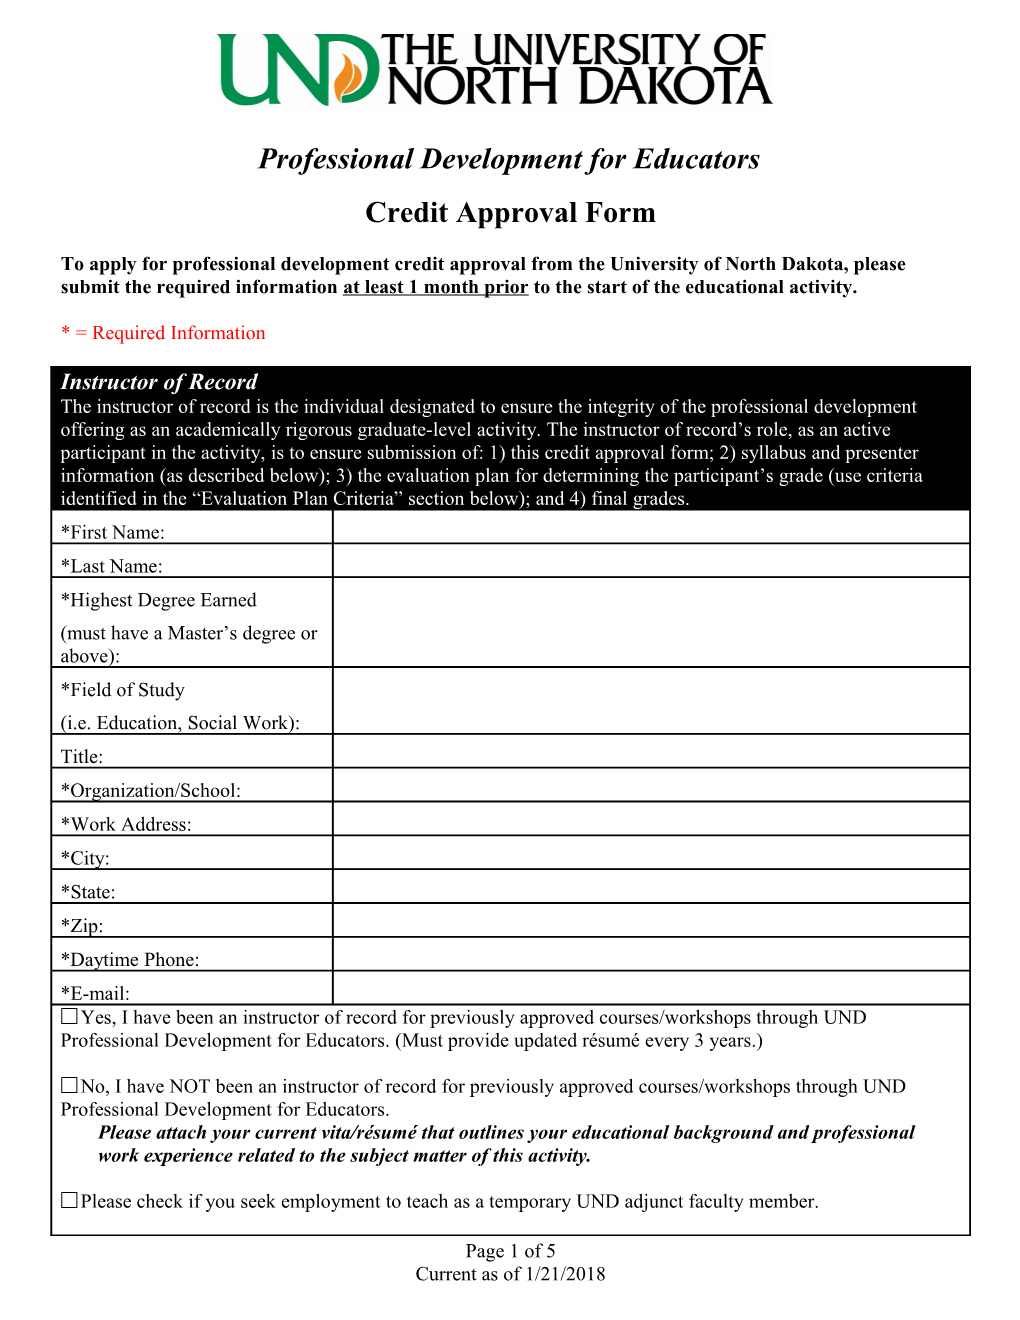 Minimum Criteria for Approval of Credit